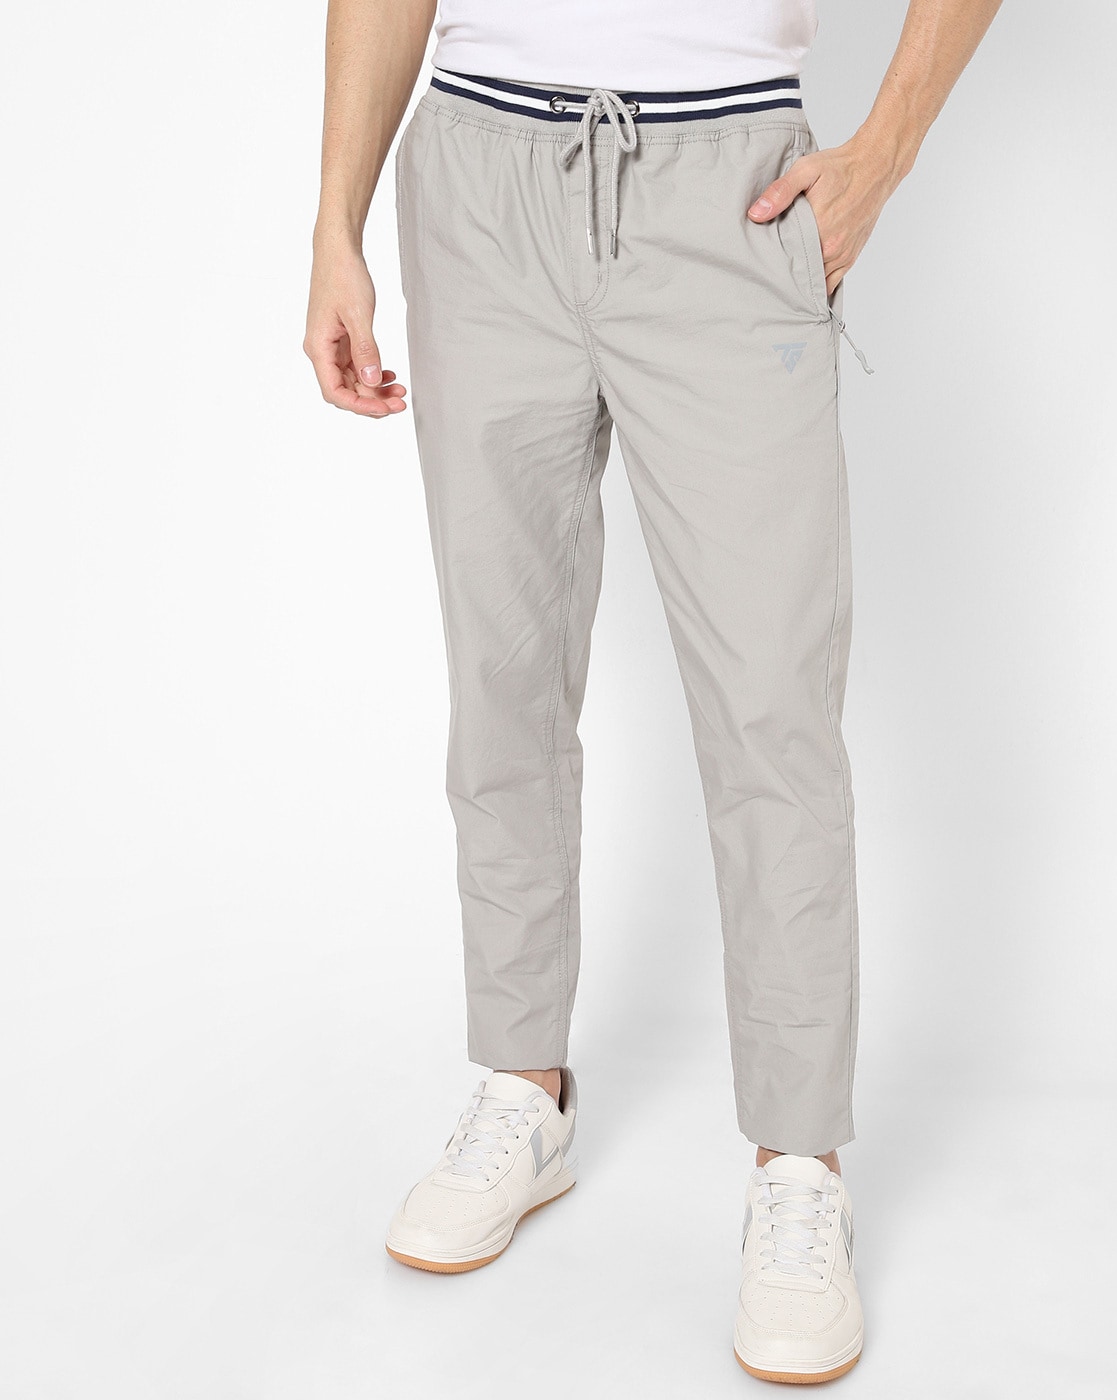 Buy Grey Track Pants for Men by STYLE ACCORD Online | Ajio.com